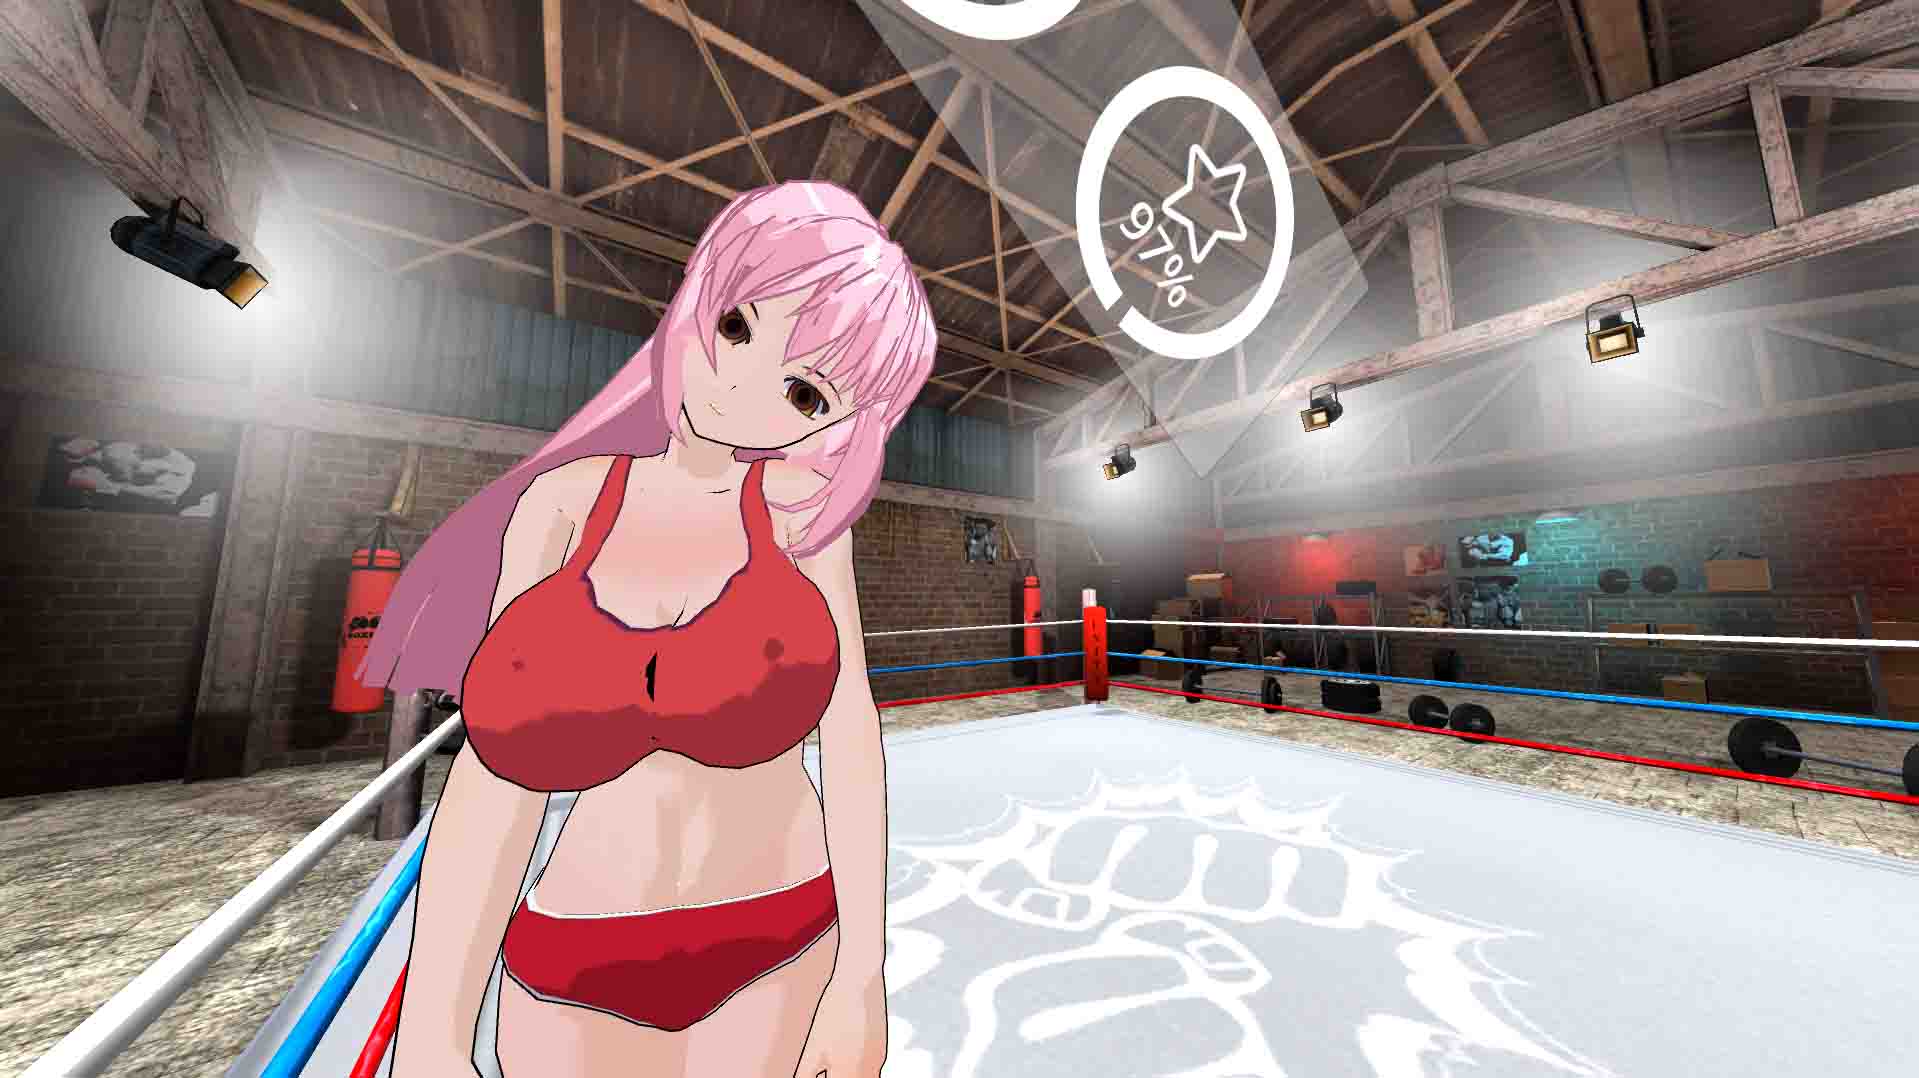 Boxing porn game